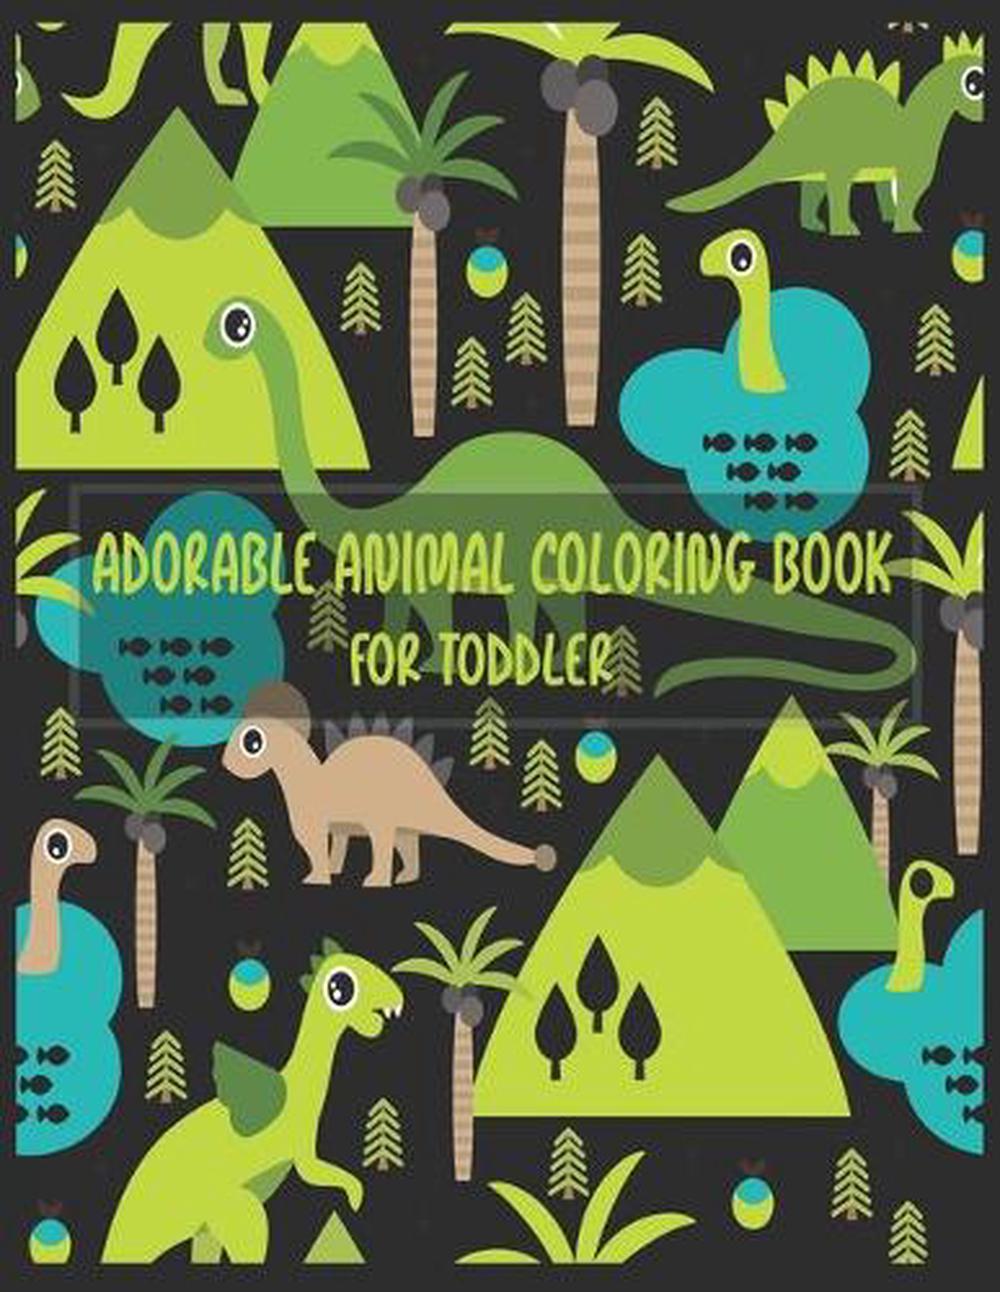 Download Adorable Animal Coloring Book For Kids Stuffed Animals An Adorable Coloring Bo 9781704040875 Ebay